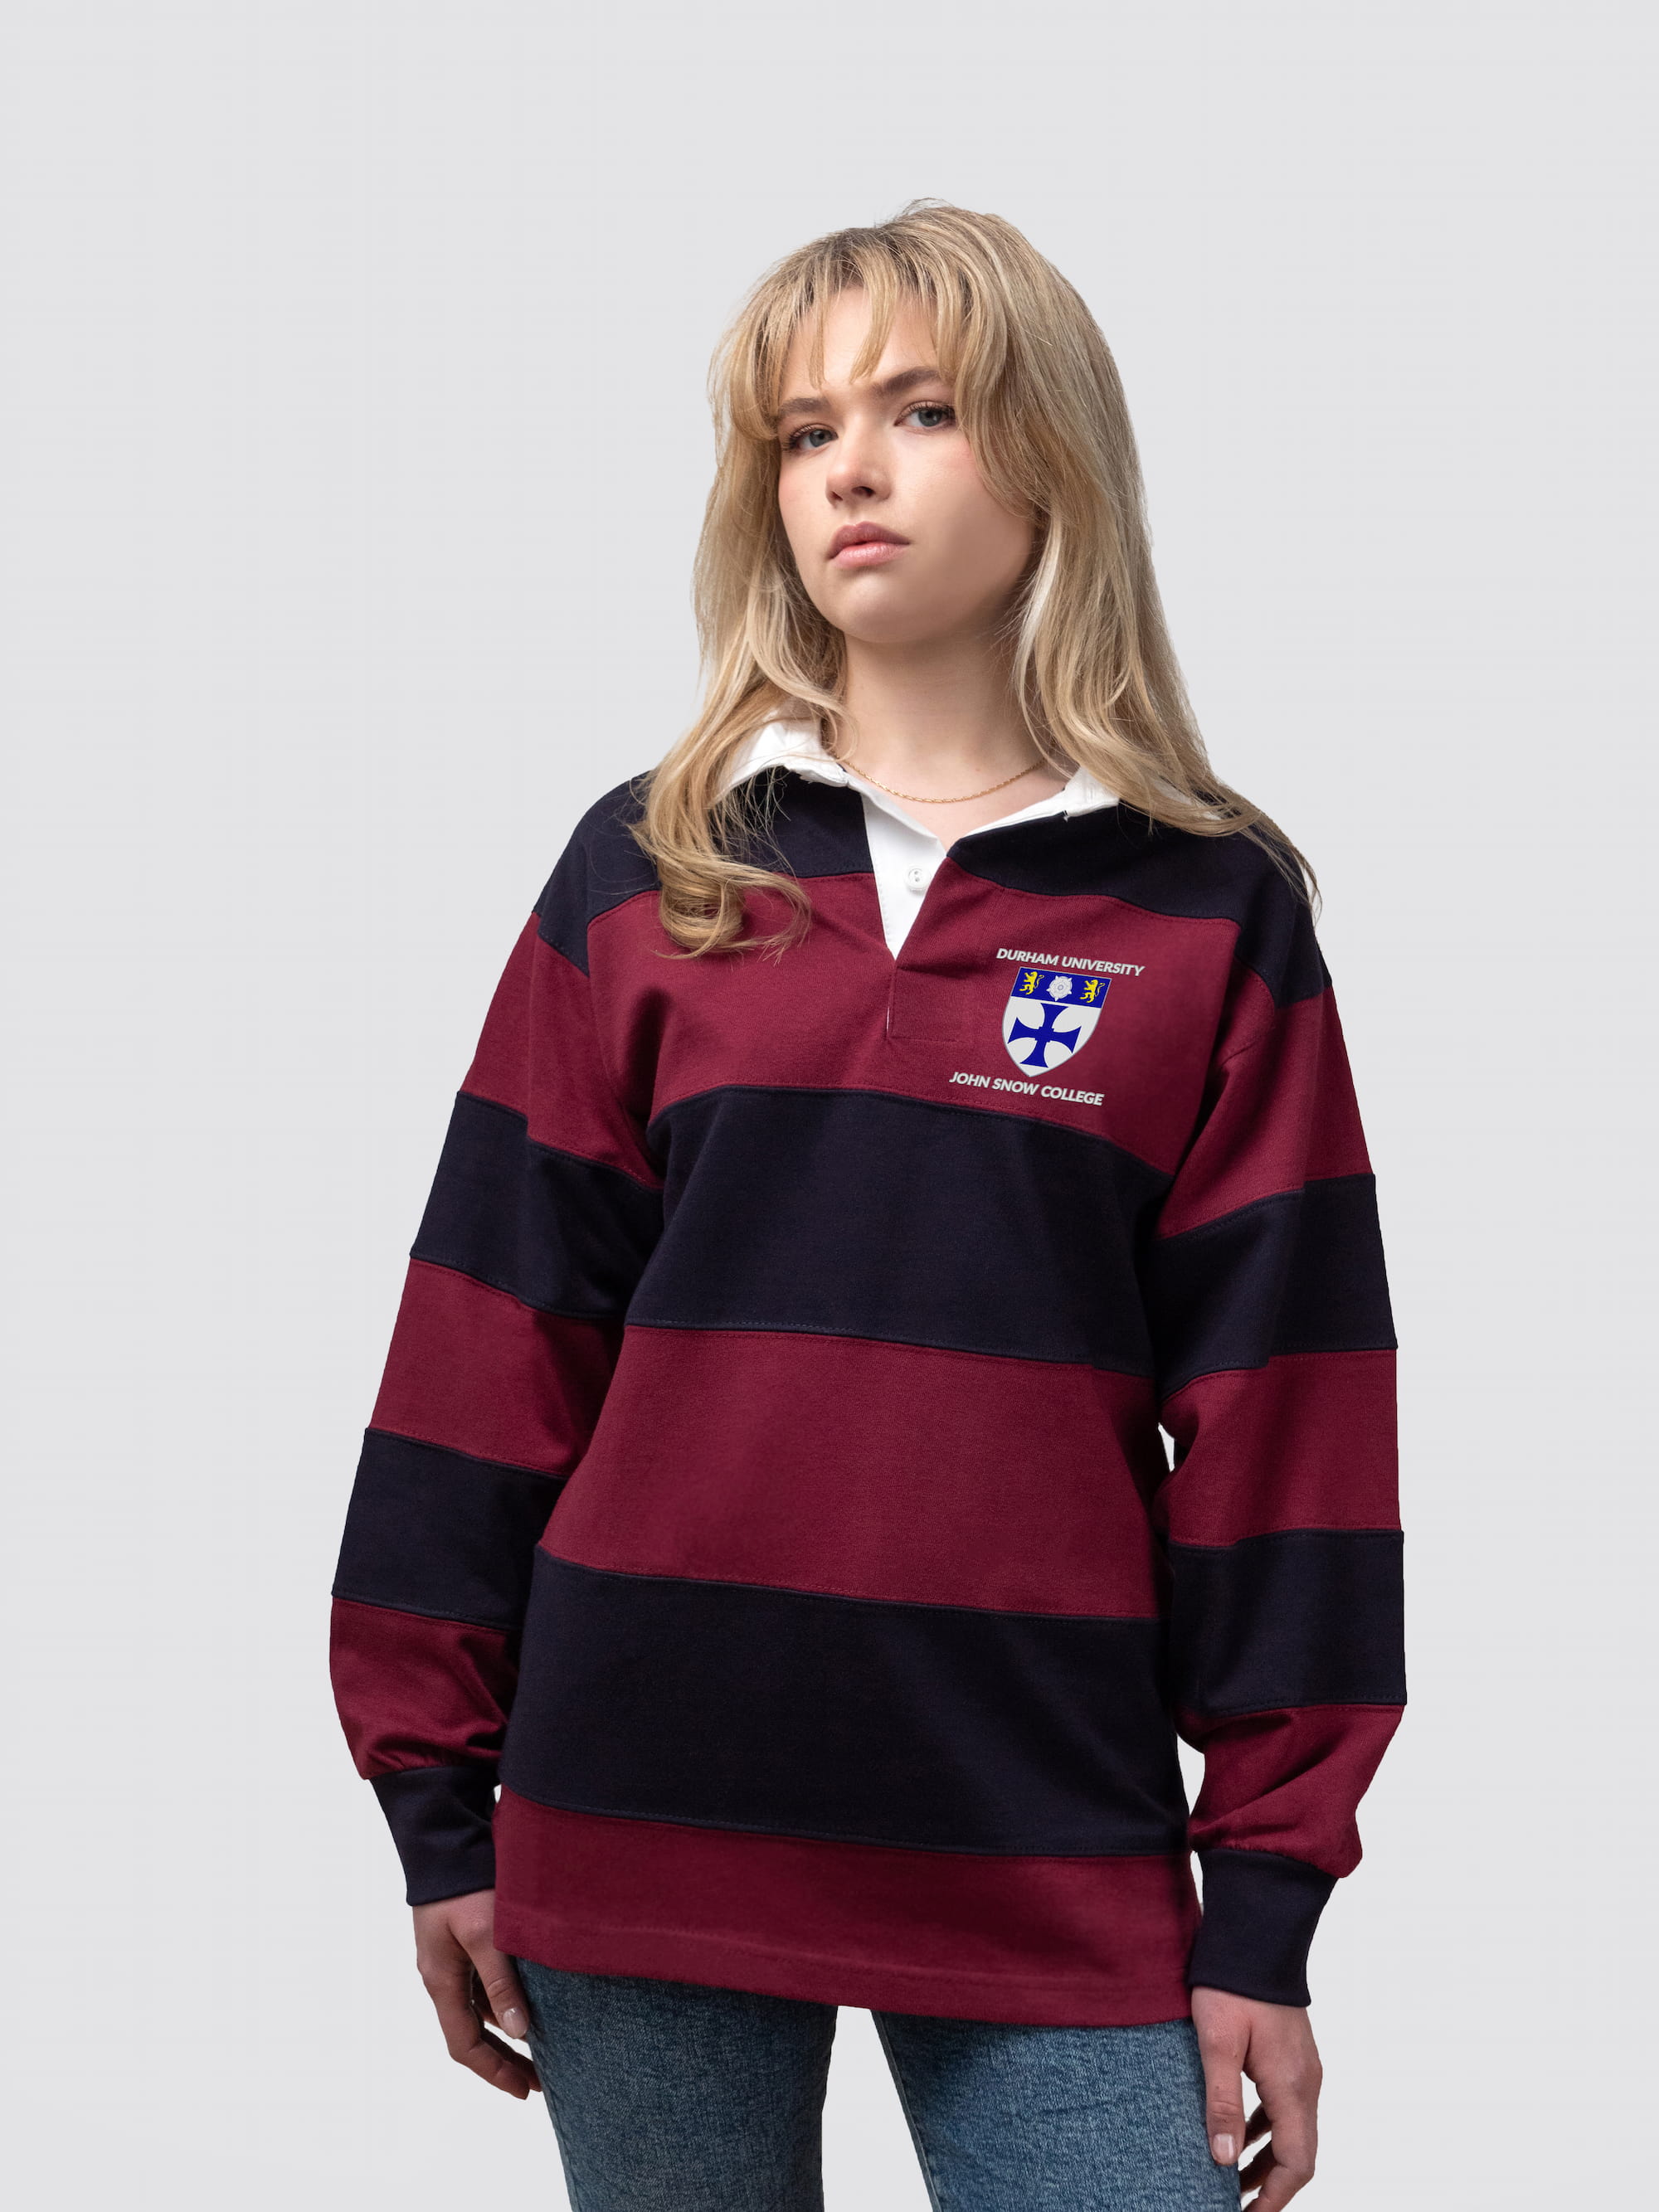 John Snow College rugby shirt, with burgundy and navy stripes